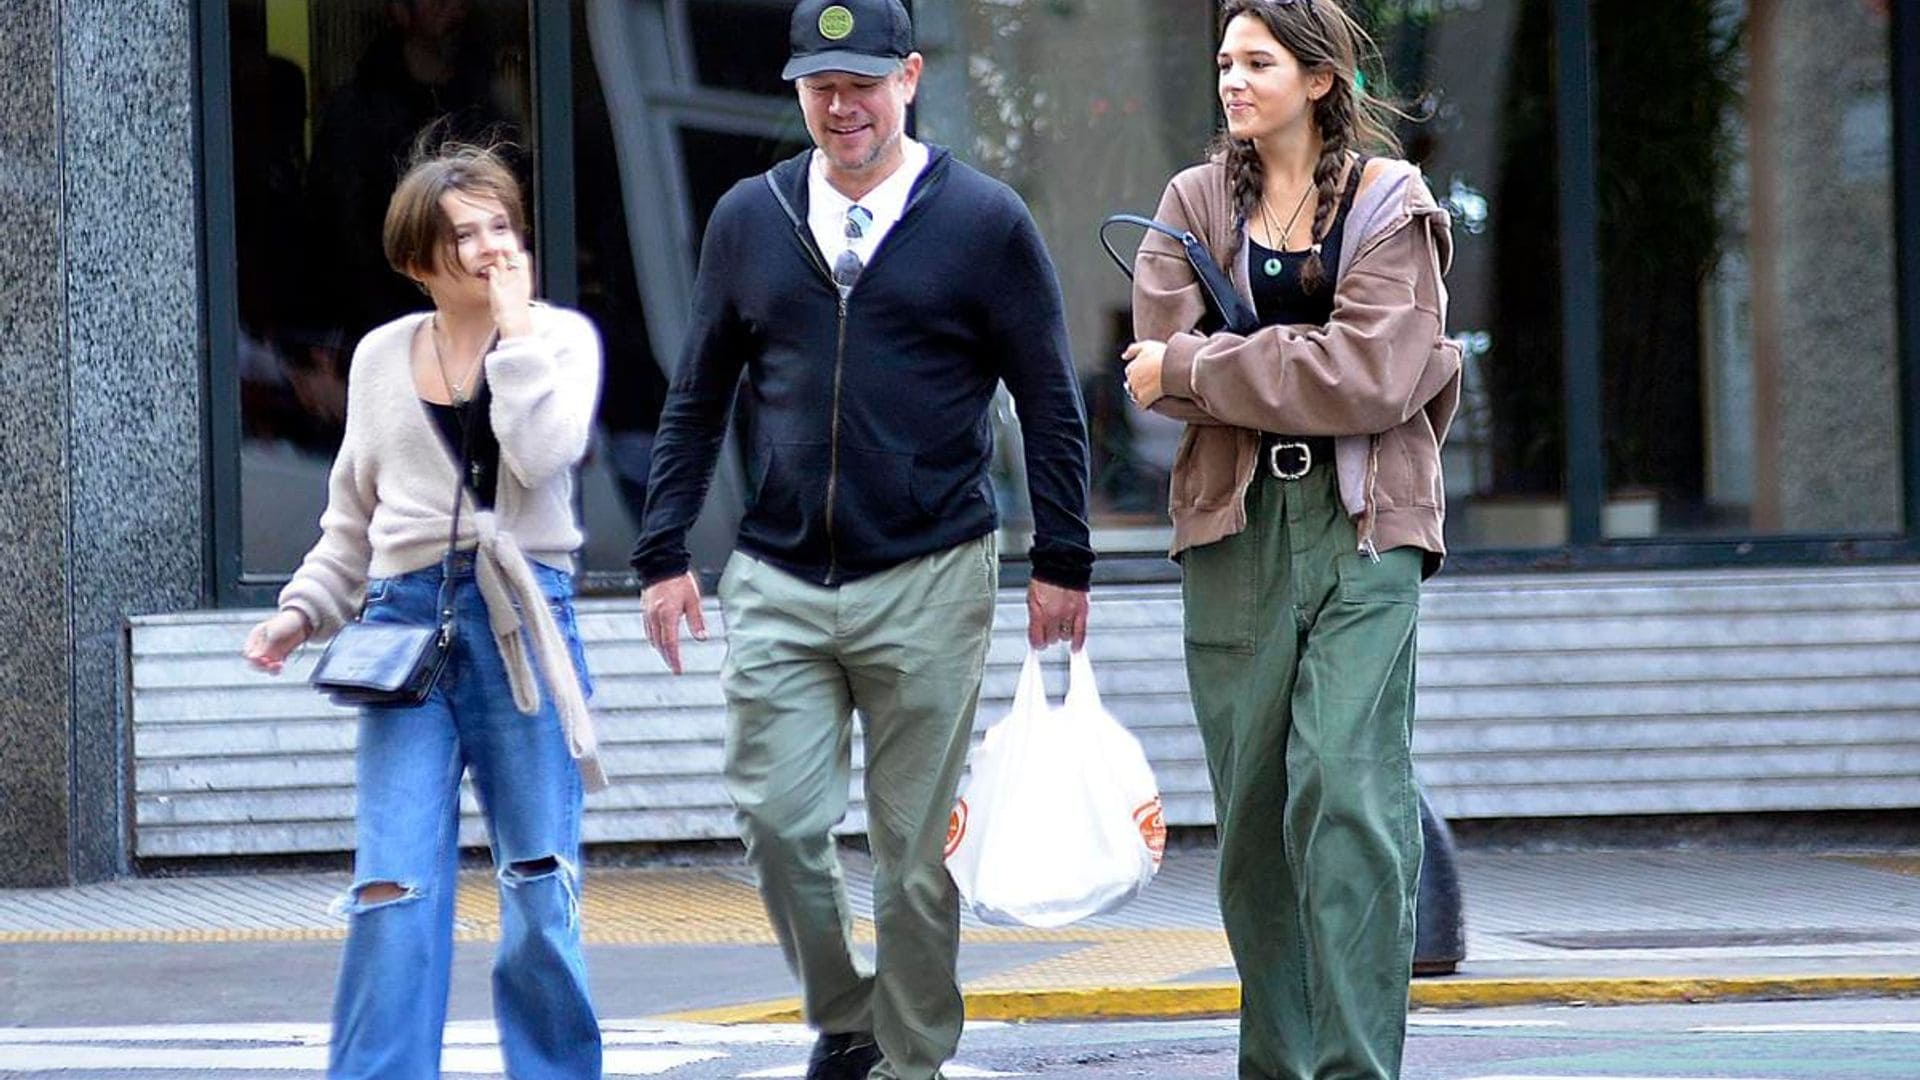 Matt Damon and his family enjoy their vacation in Argentina